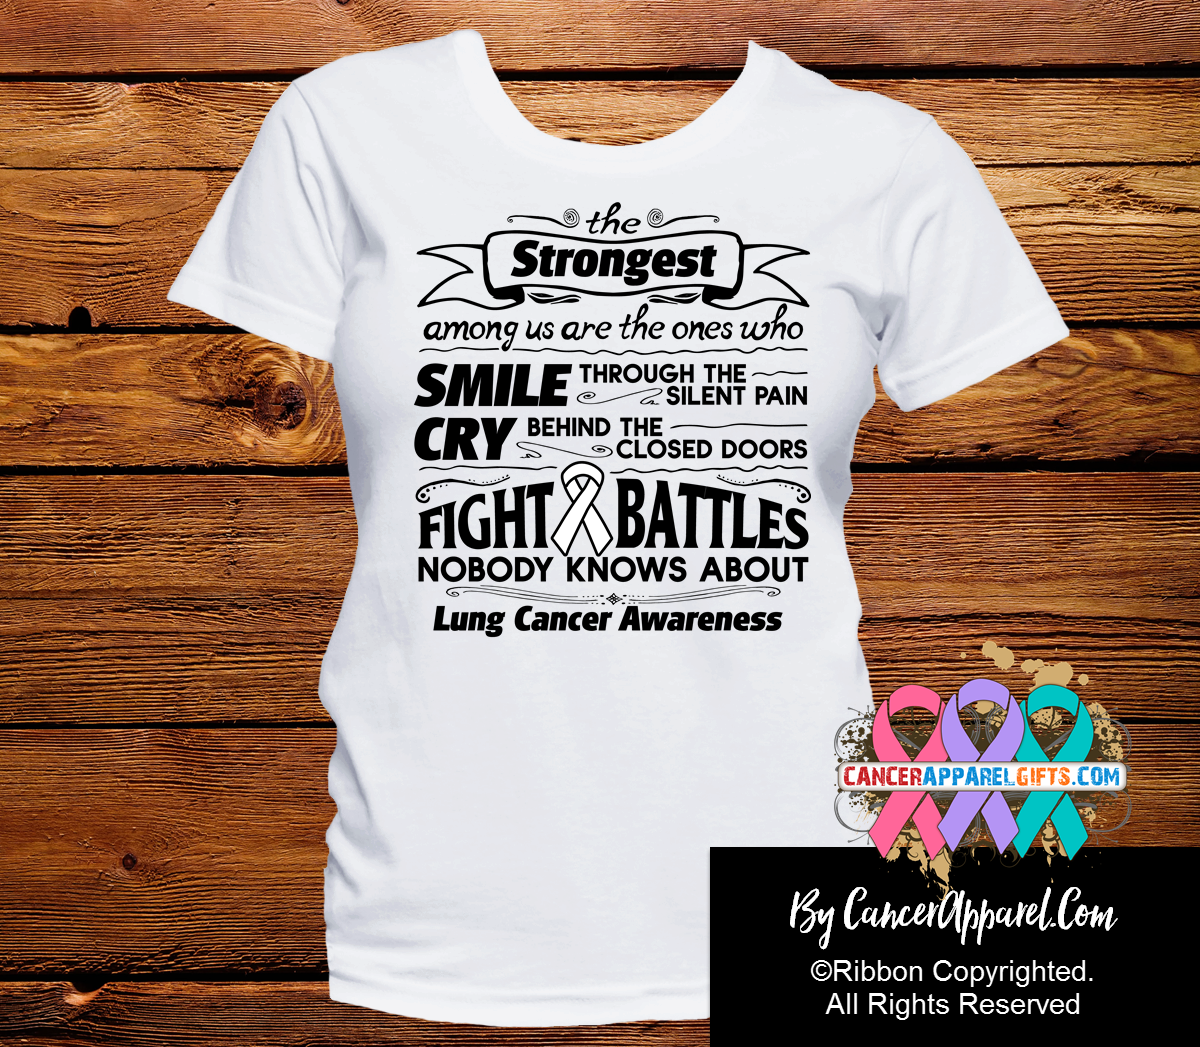 Lung Cancer The Strongest Among Us Shirts - Cancer Apparel and Gifts